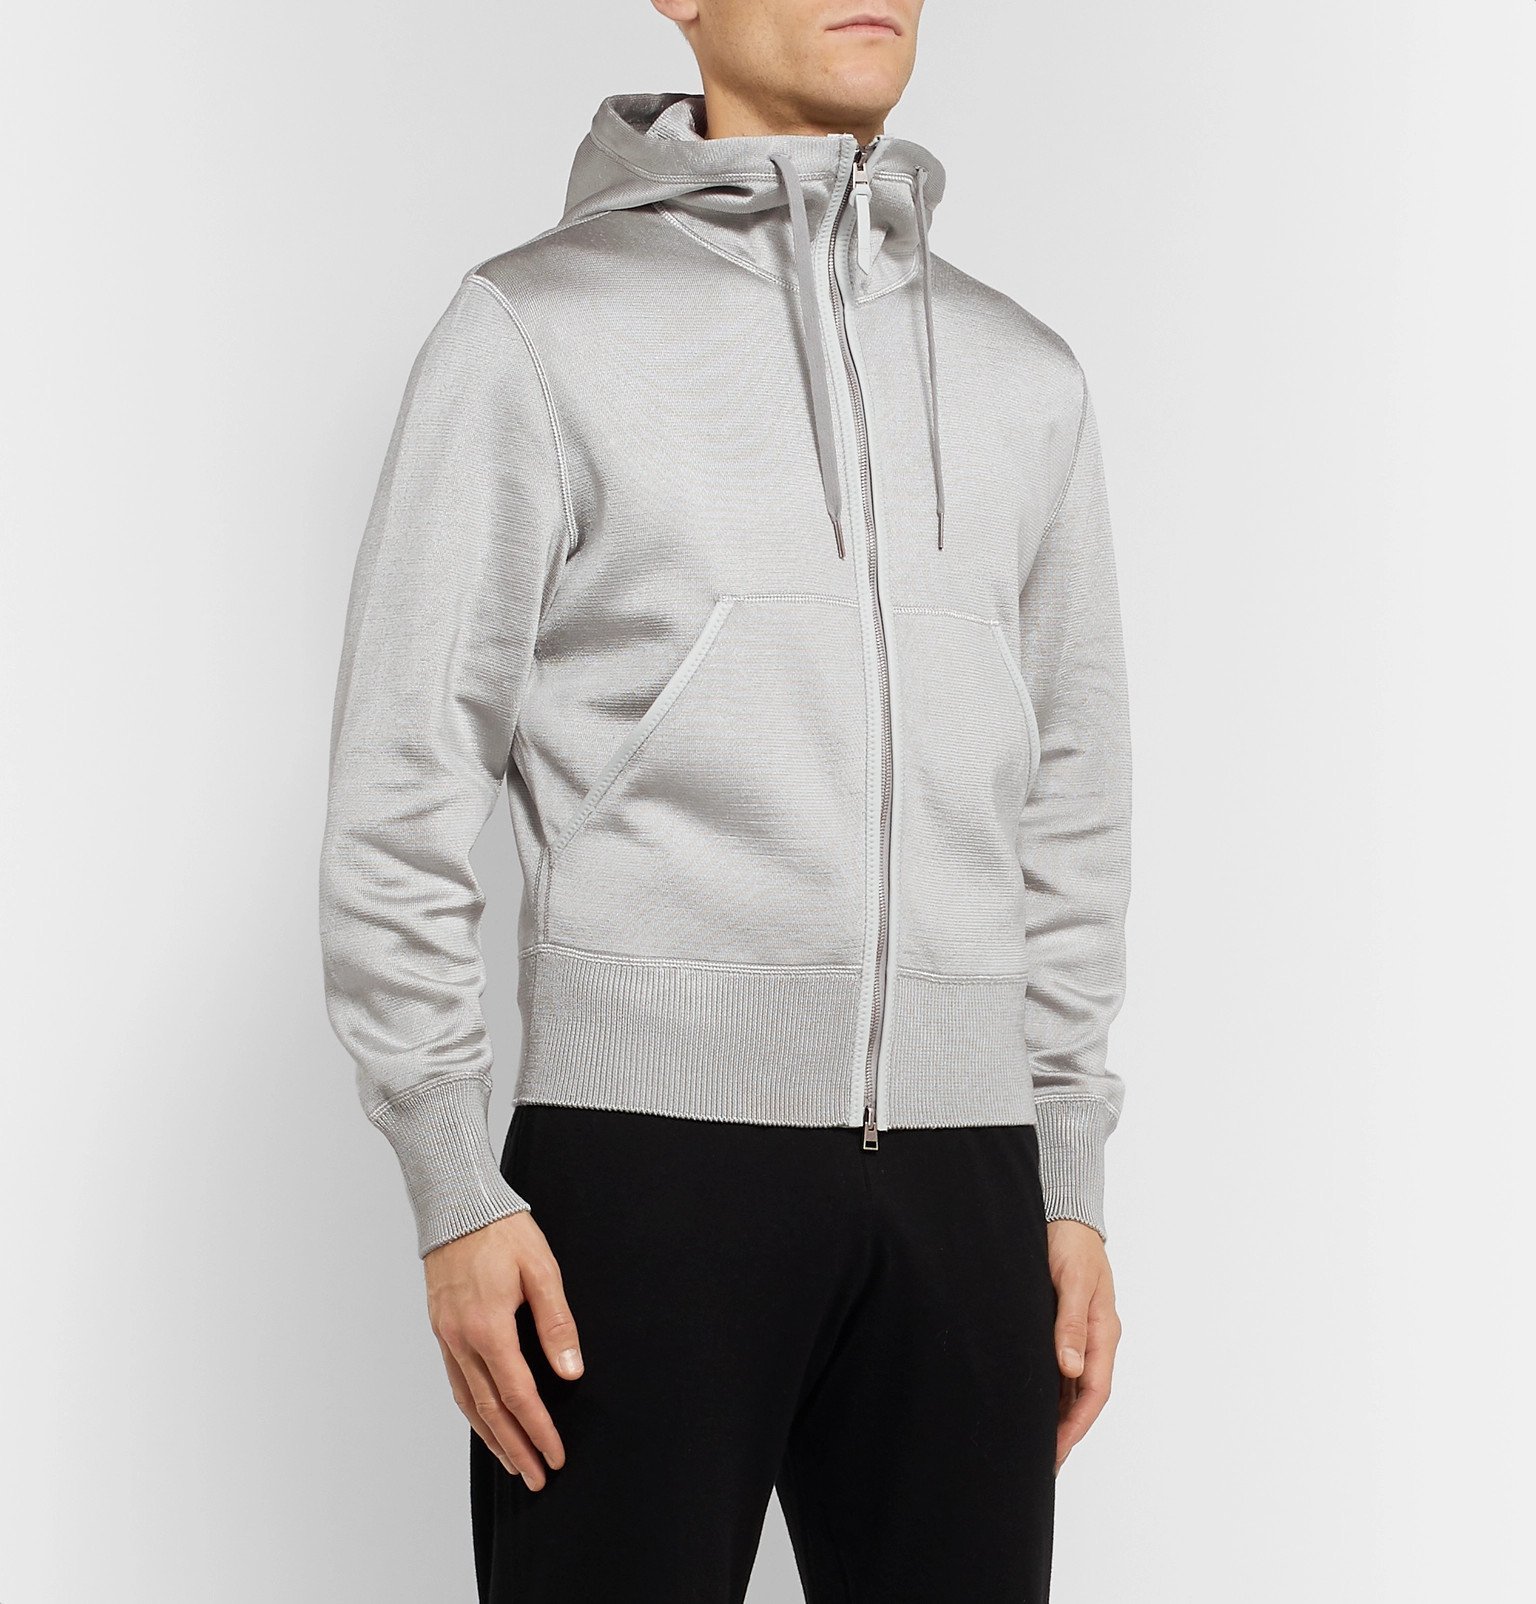 TOM FORD - Leather-Trimmed Jersey Zip-Up Hoodie - Silver TOM FORD